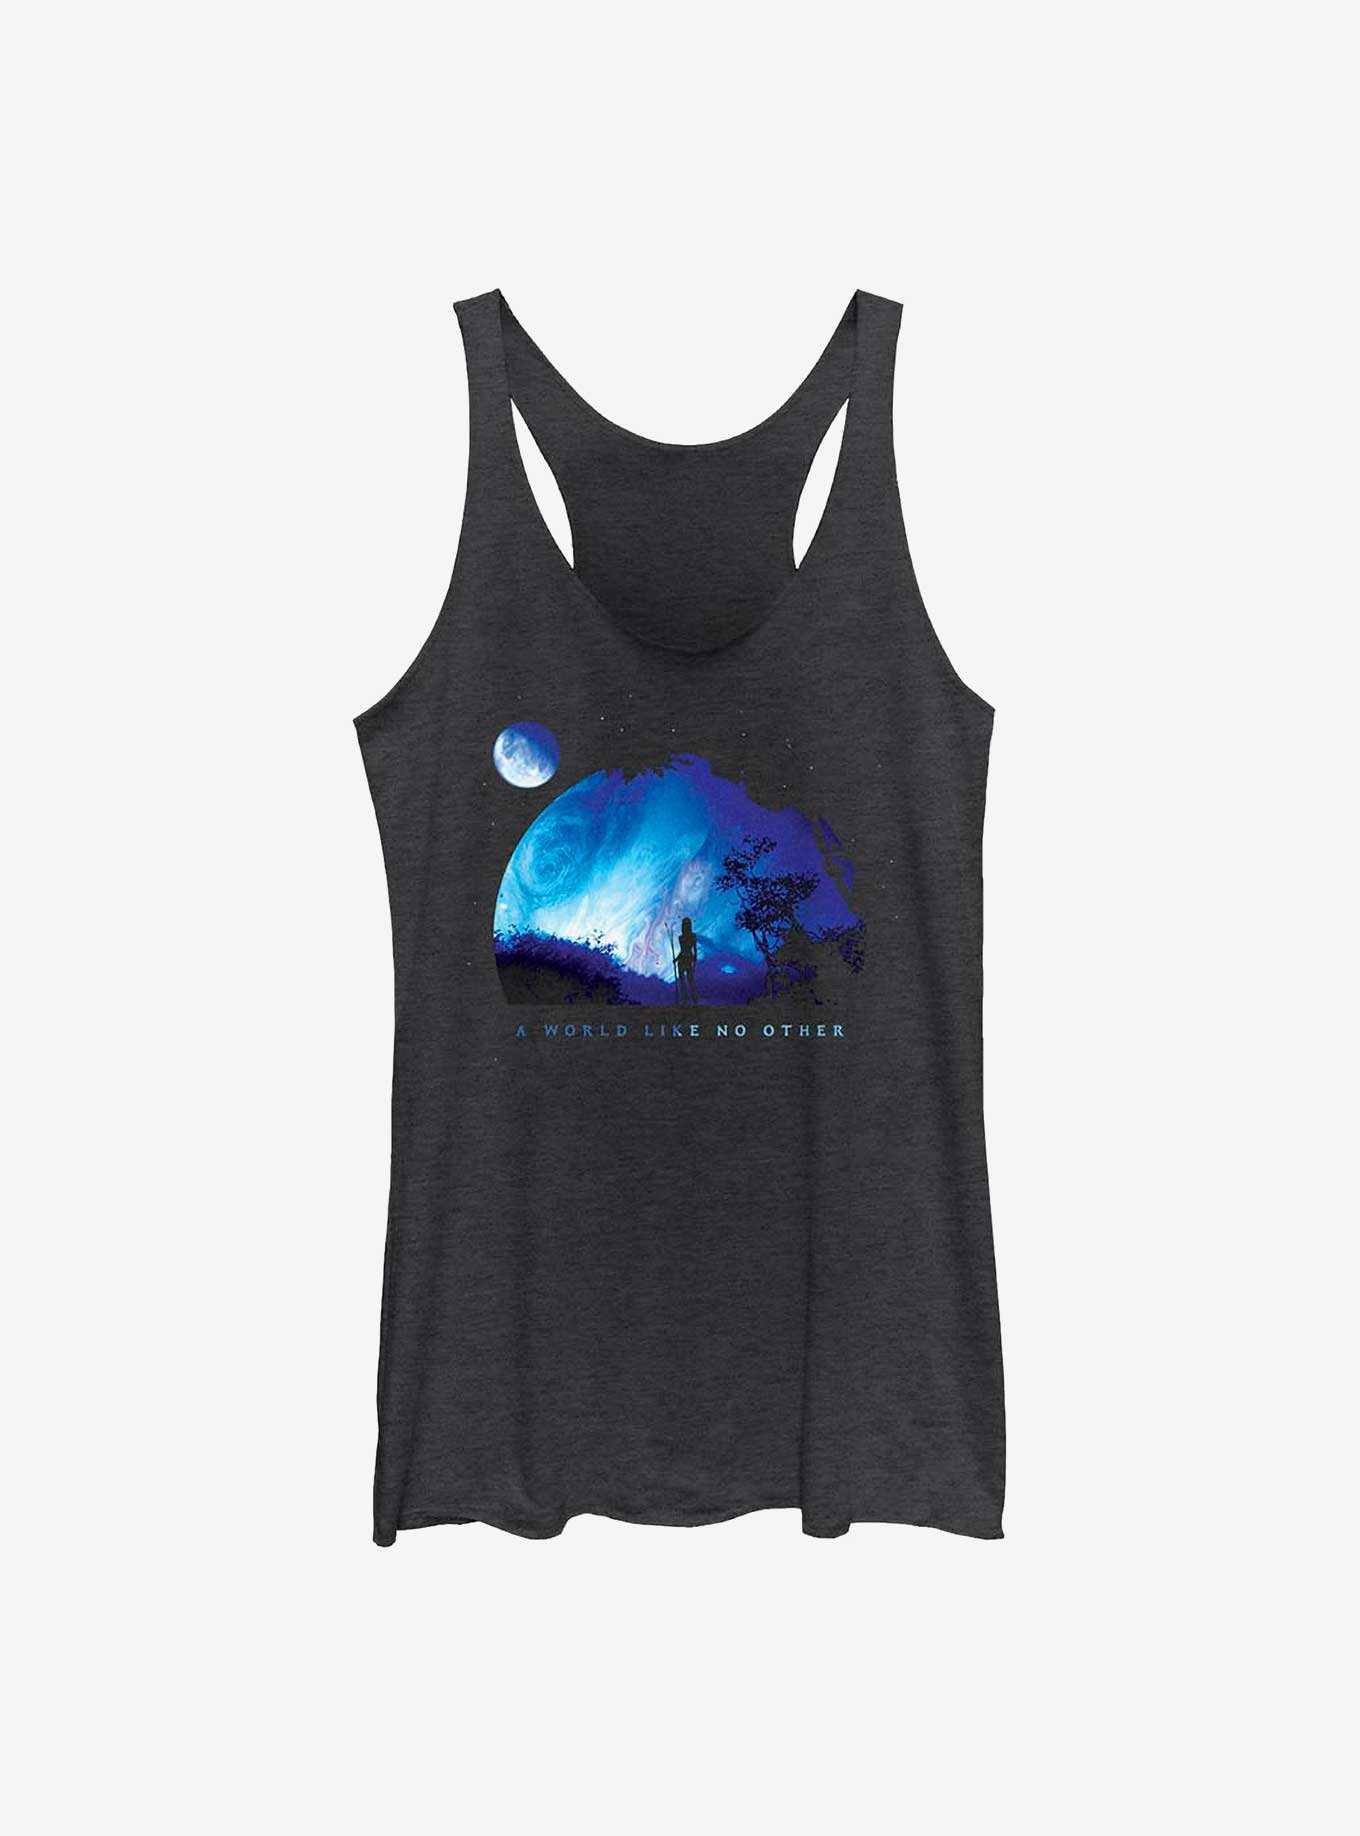 Avatar A World Like No Other Girls Tank, , hi-res